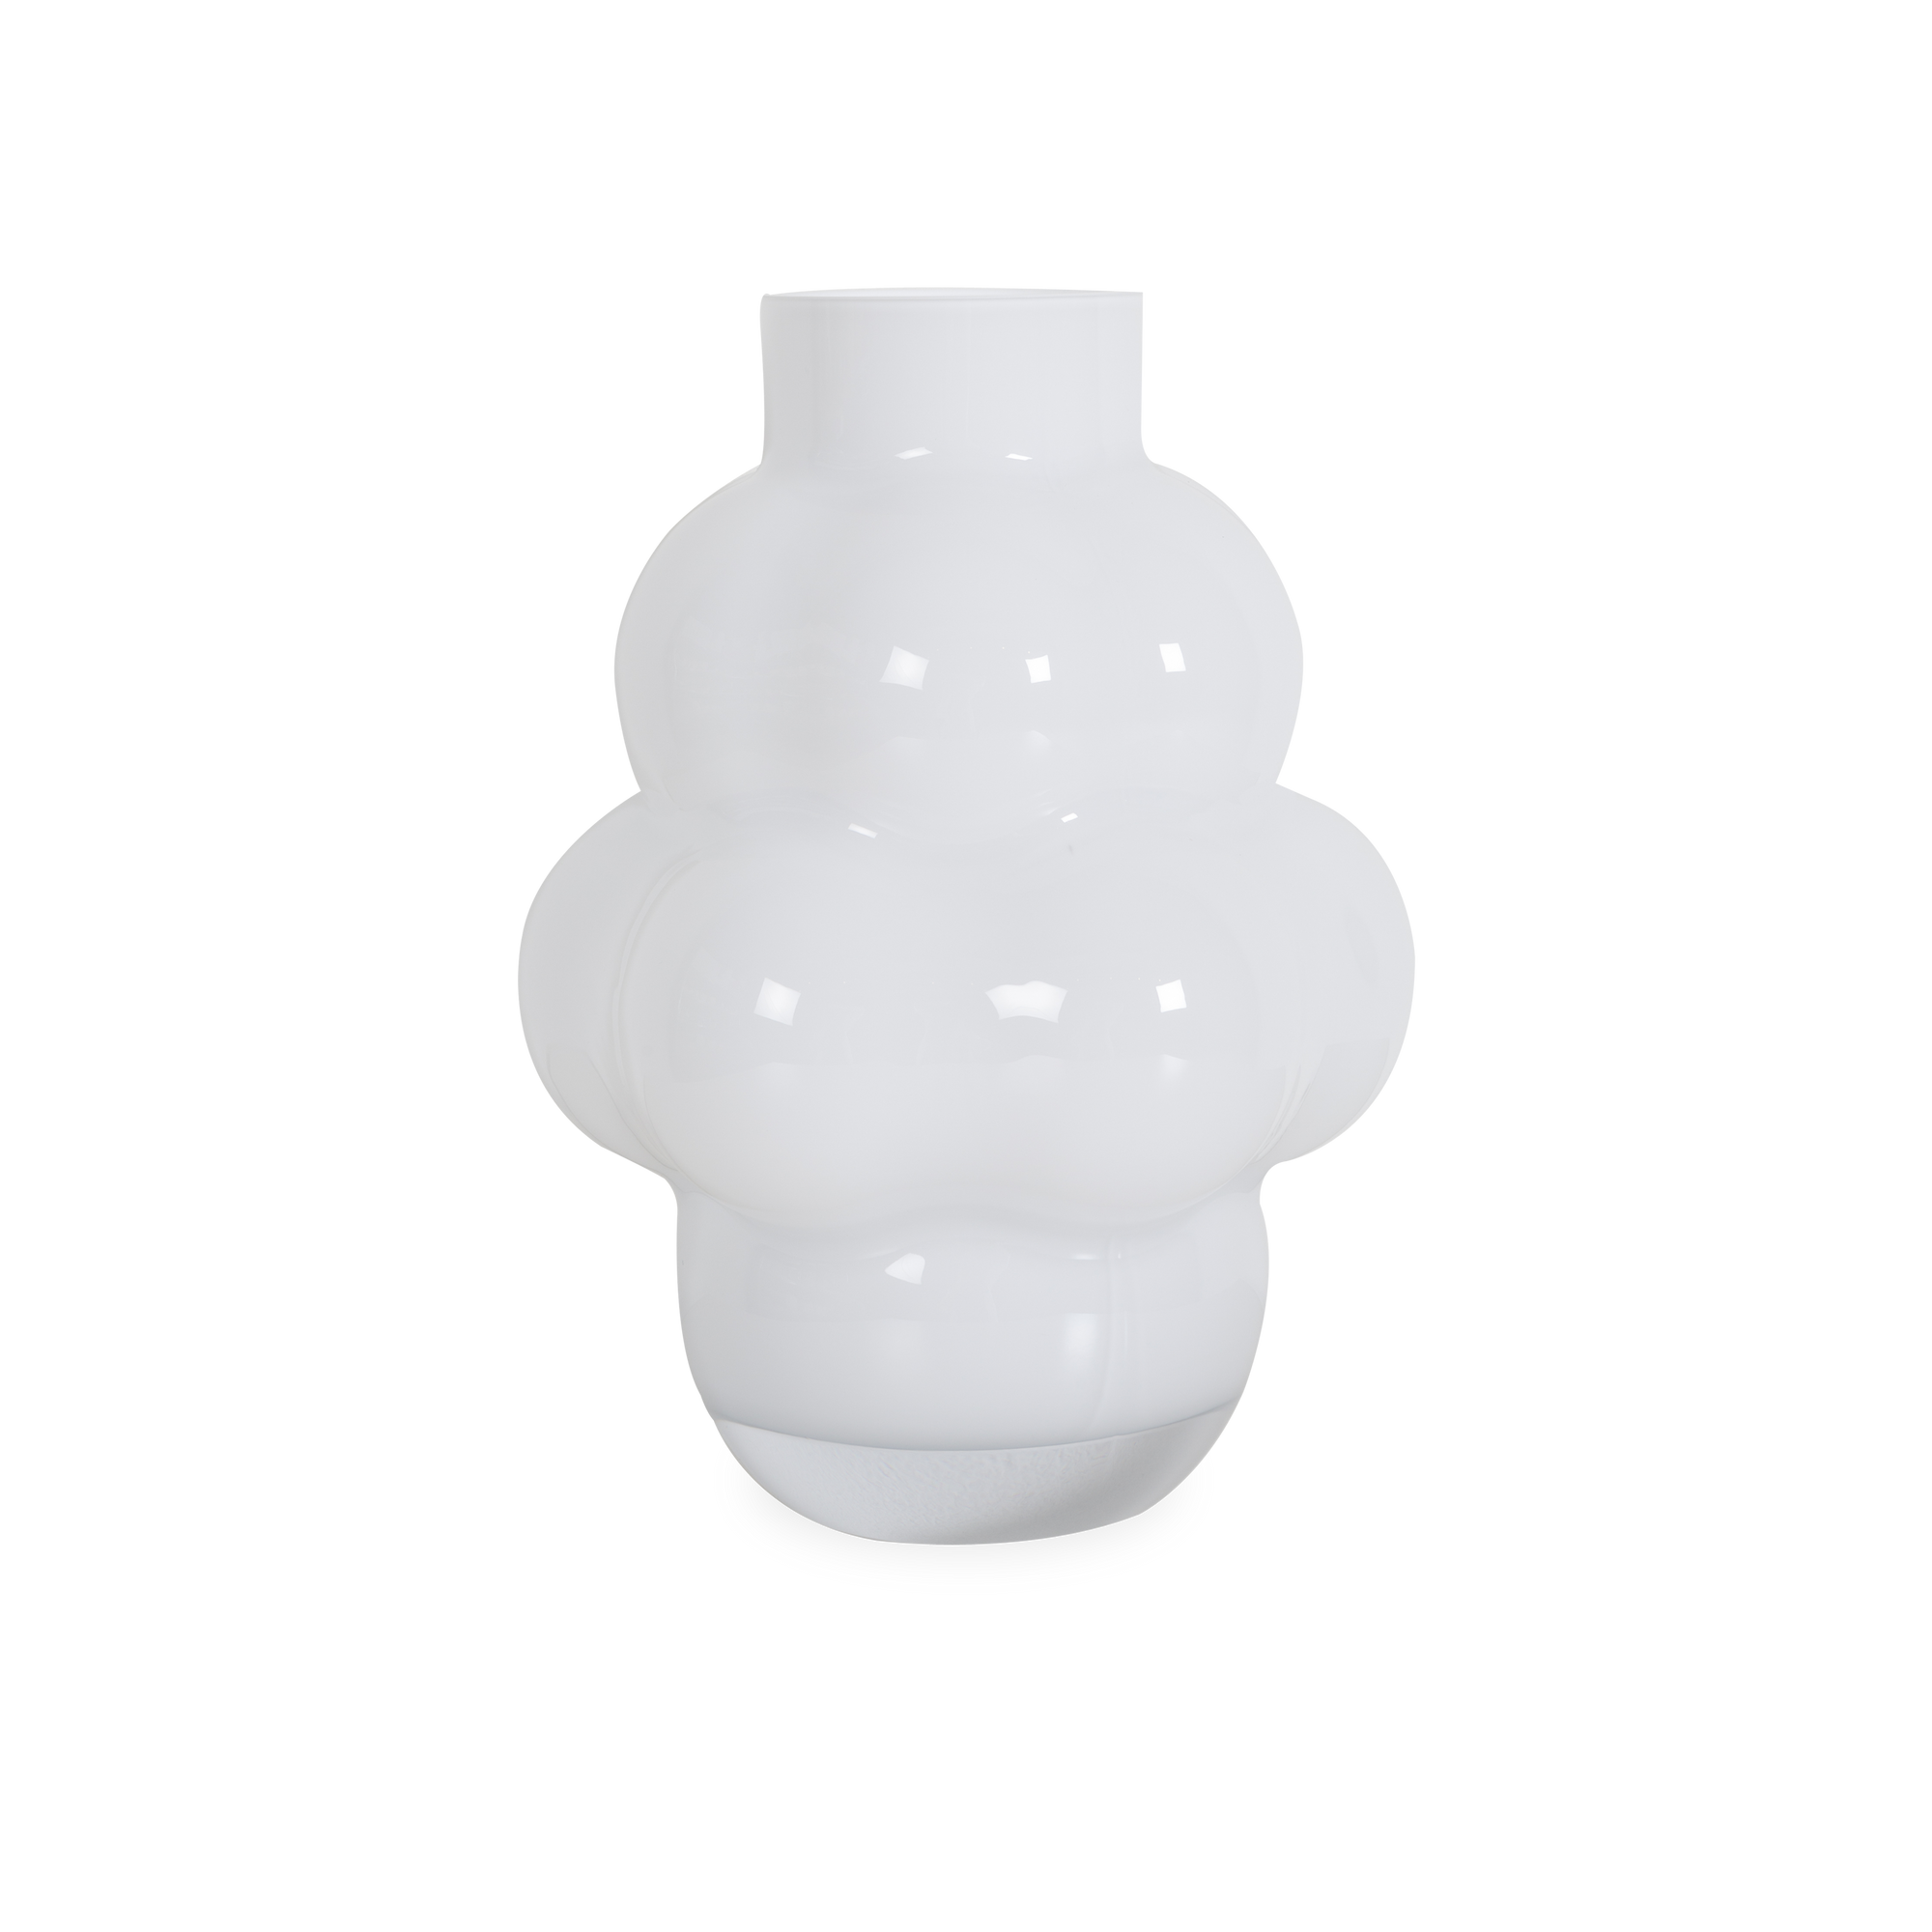 Characterized by its bulbous figure and cordial lines, the Balloon Vase has a soft and amicable silhouette that is versatile for any setting.